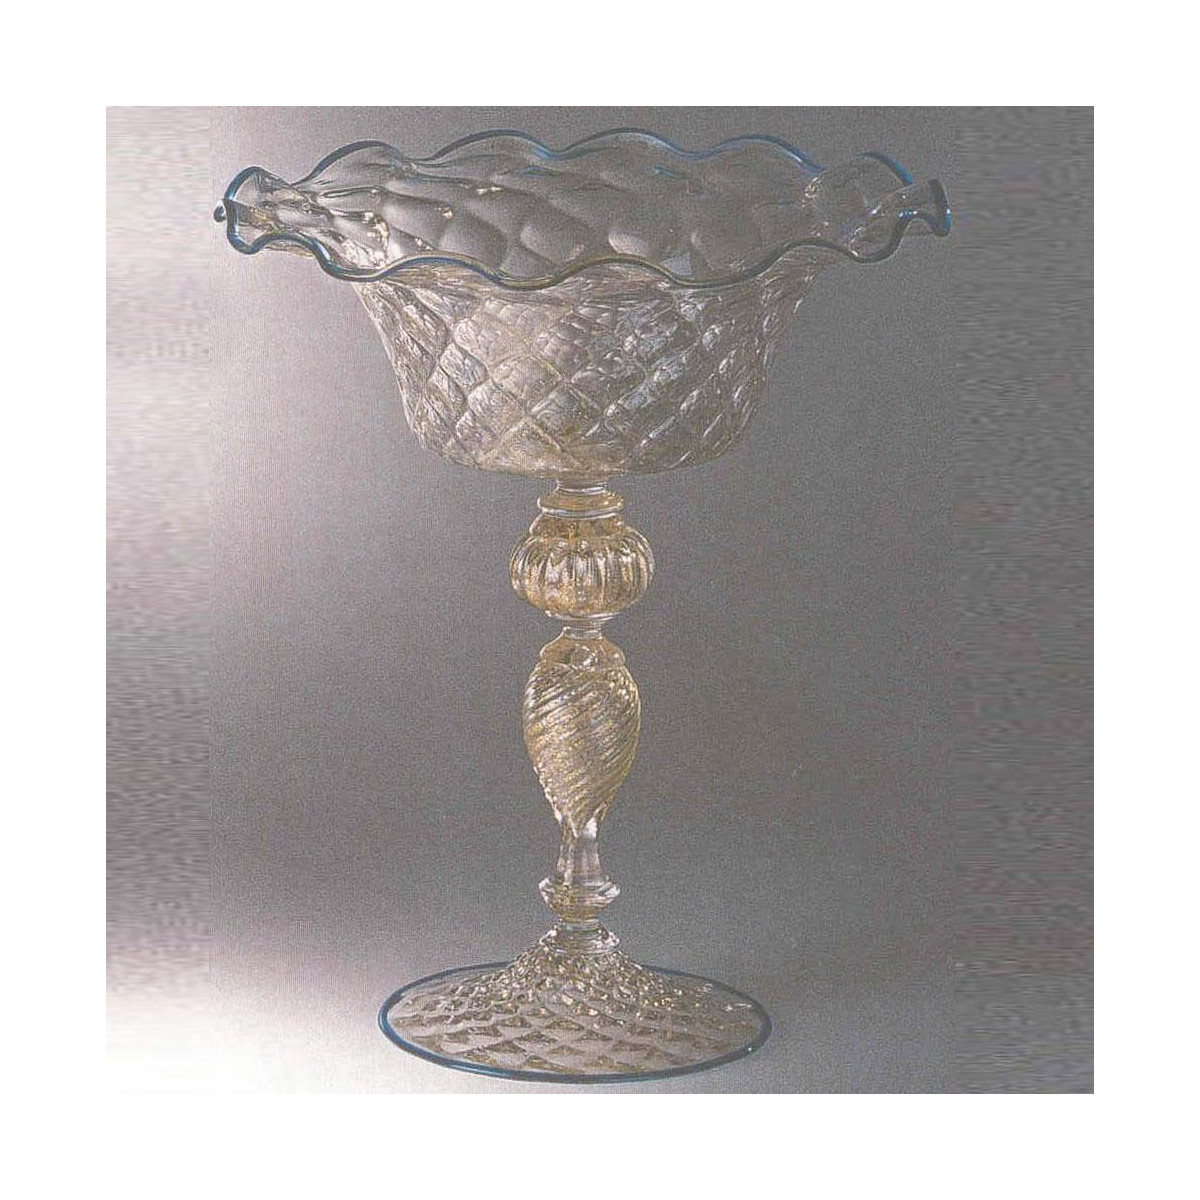 "Talismano" Murano glass fruitstand - pink with gold details